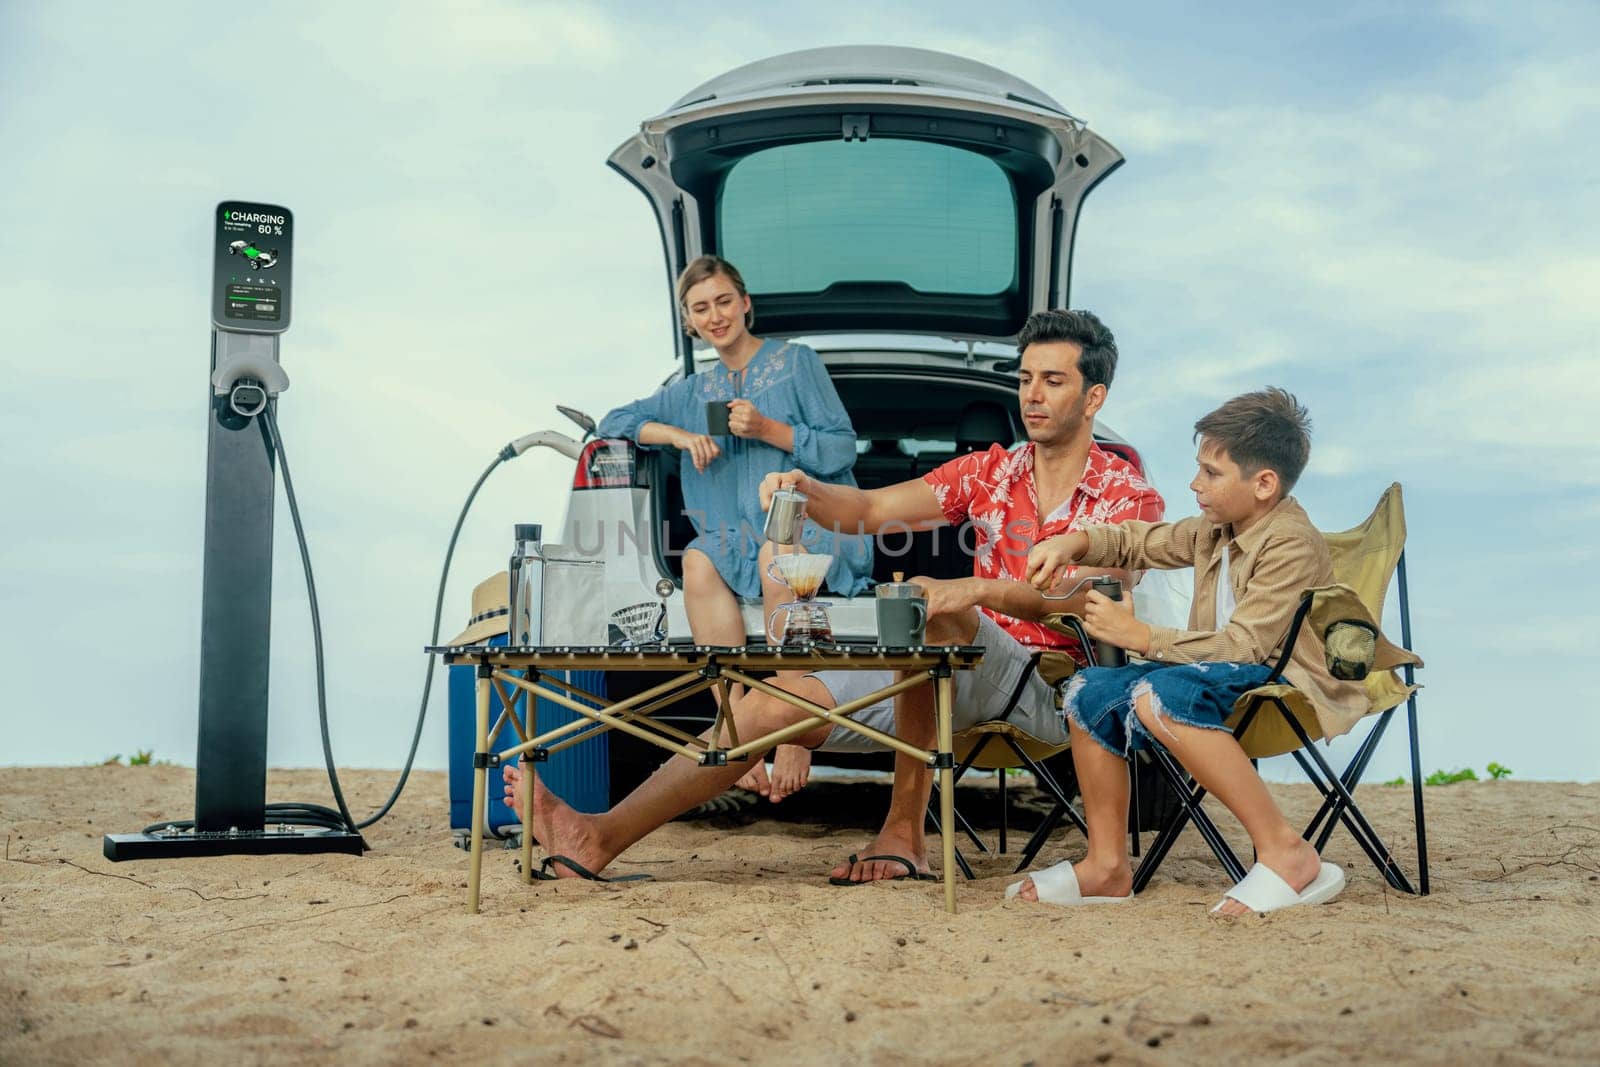 Family vacation trip traveling by the beach with electric car, happy family recharge EV car, enjoying outdoor camping coffee. Seascape travel and eco-friendly car for clean environment. Perpetual